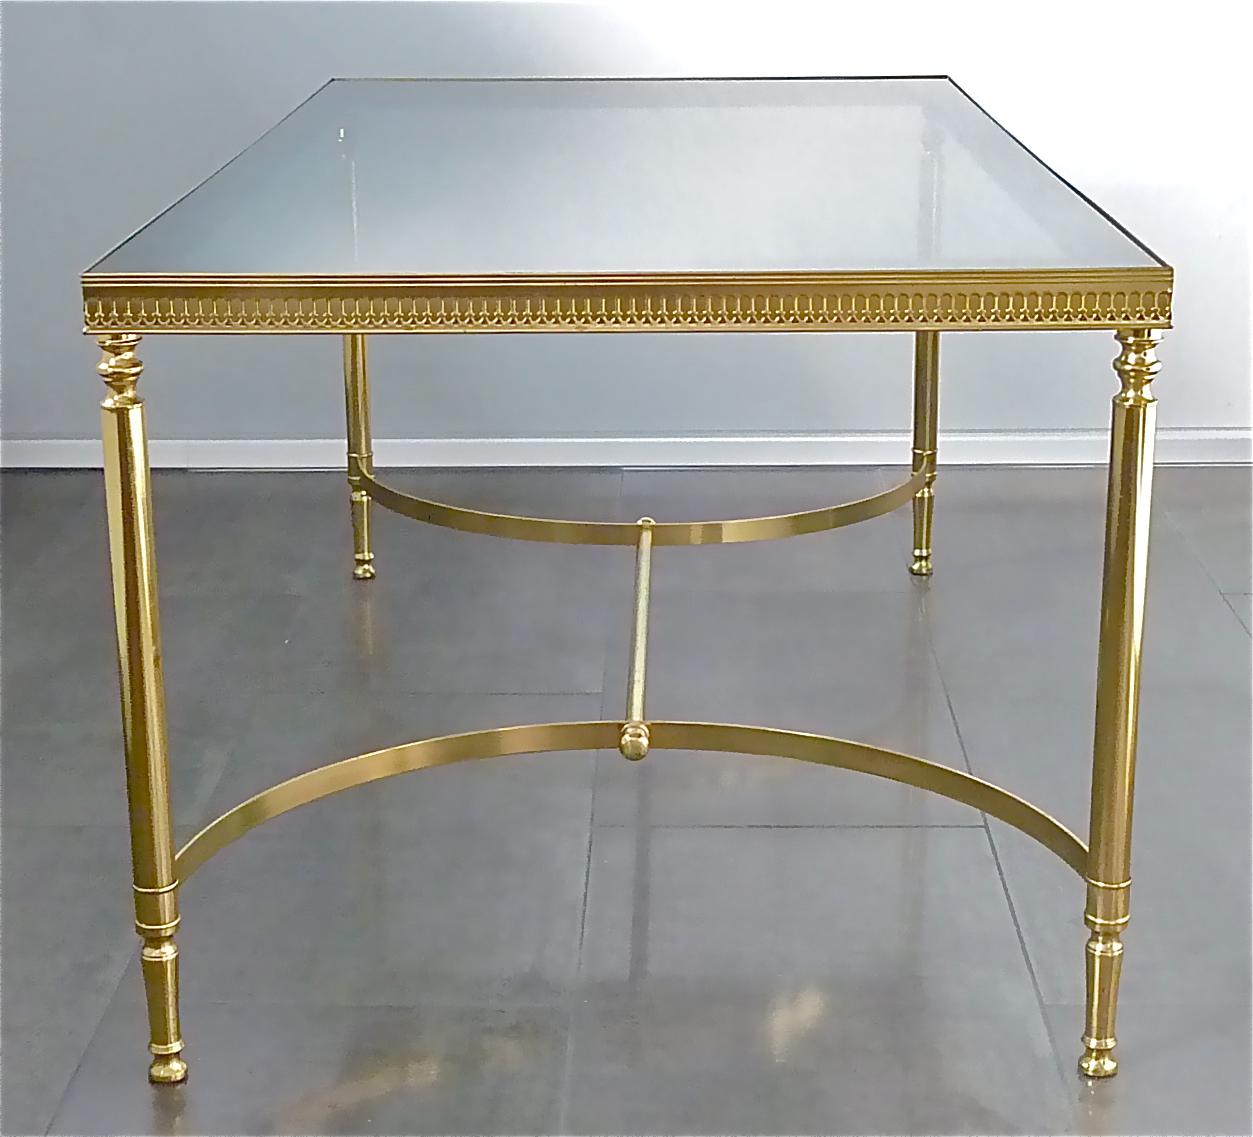 French Midcentury Maison Baguès Jansen Couch Sofa Table Brass Mirror Glass 1950s For Sale 3